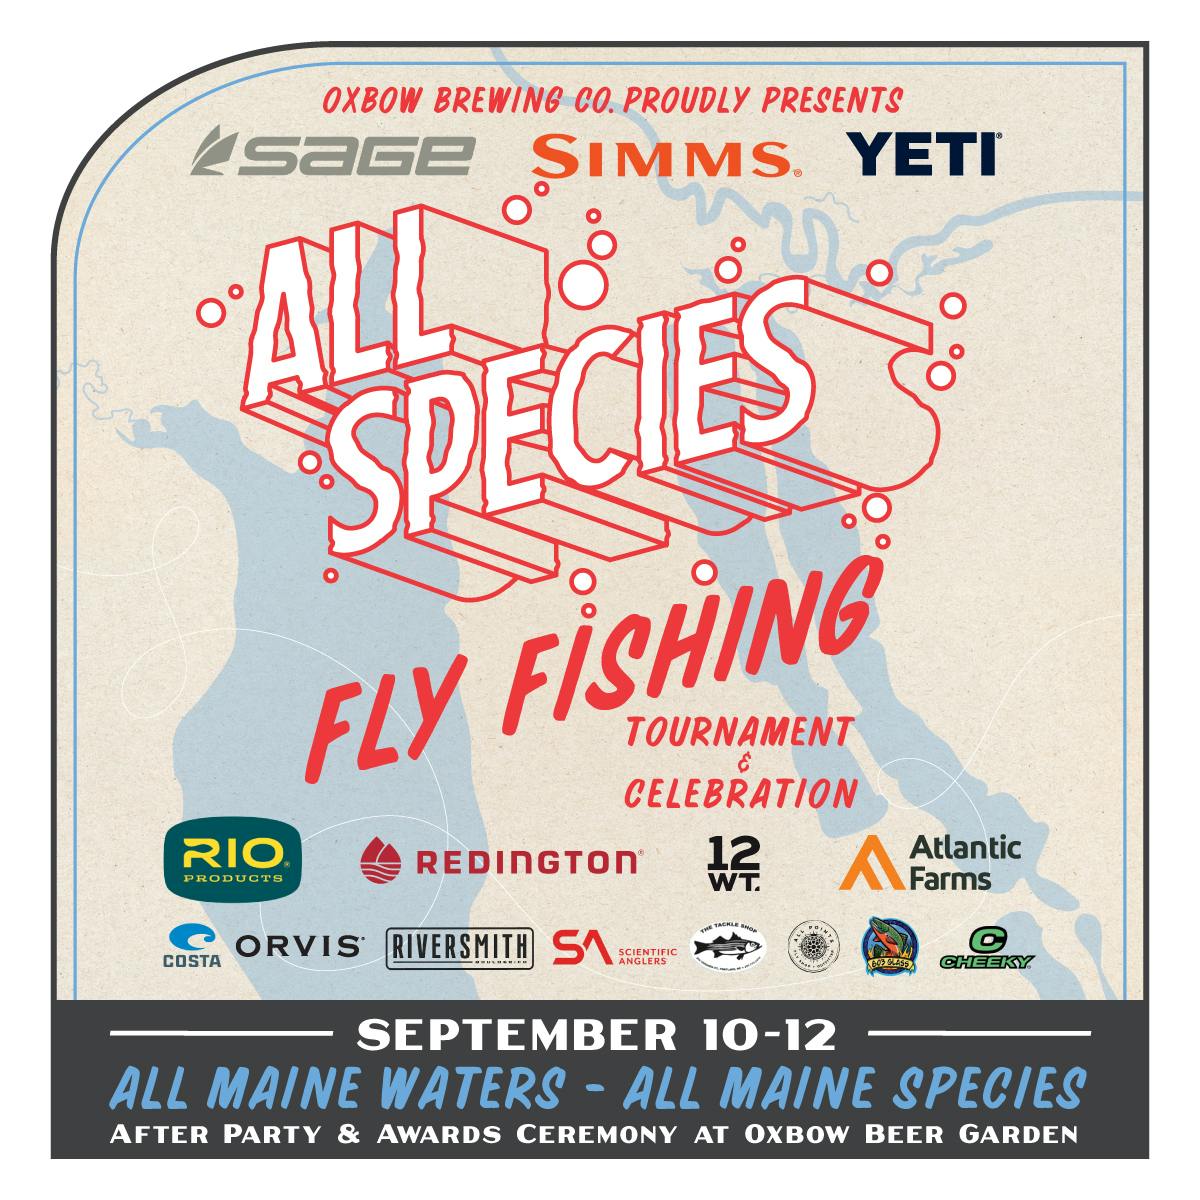 https://craftpeak-cooler-images.imgix.net/oxbow-brewing-company/all_species_fly_fishing_tournament_sept_2021_social_square_Revised.jpg?auto=compress%2Cformat&ixlib=php-3.3.1&s=2b8b0d324c03e6cf99e54afc6f57bcb8